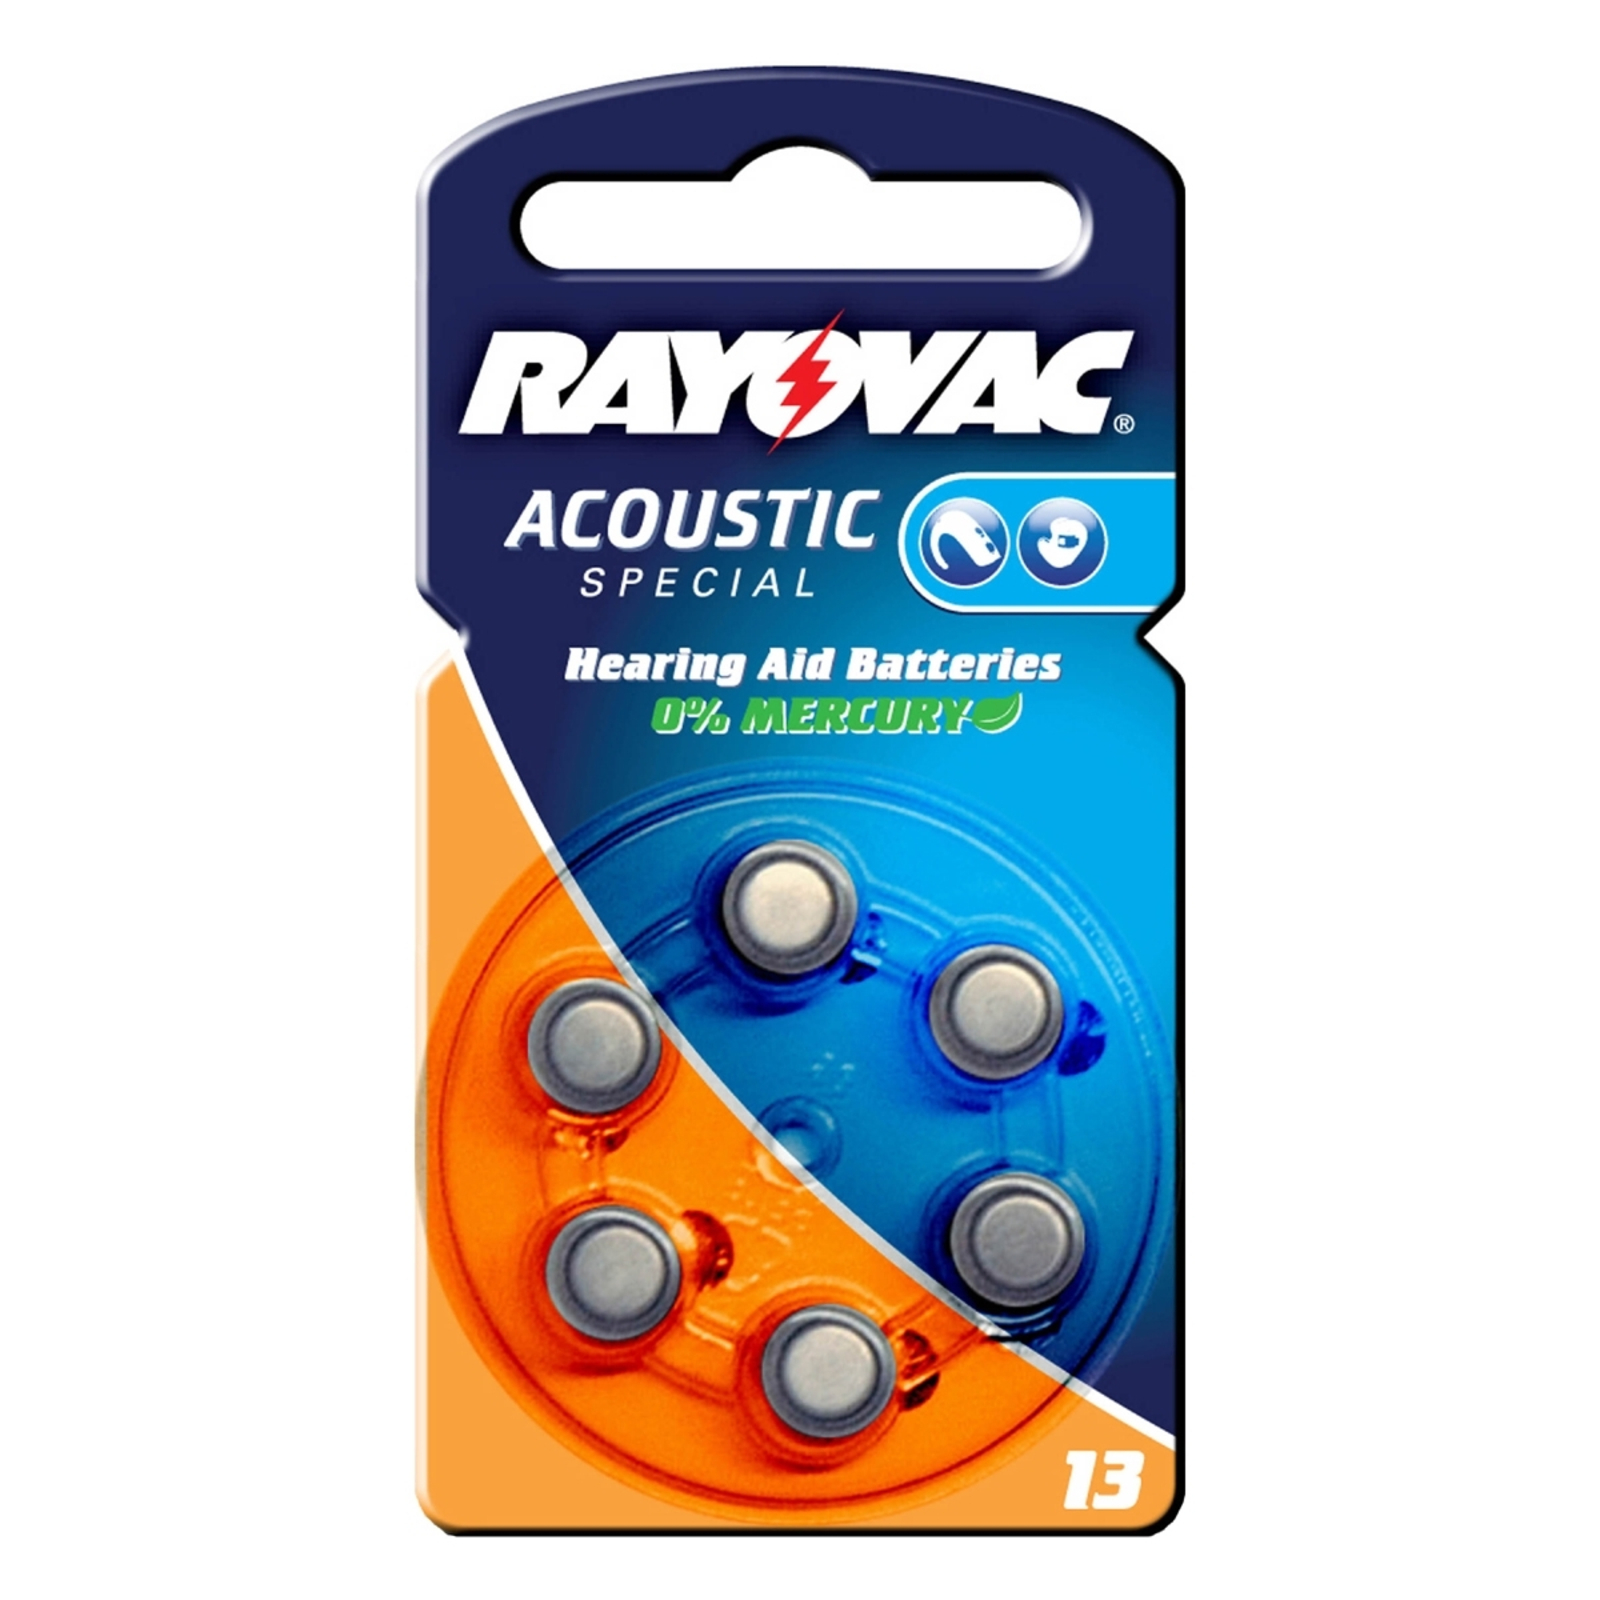 Rayovac 13 Acoustic 1.4 V, 310mAh button cell